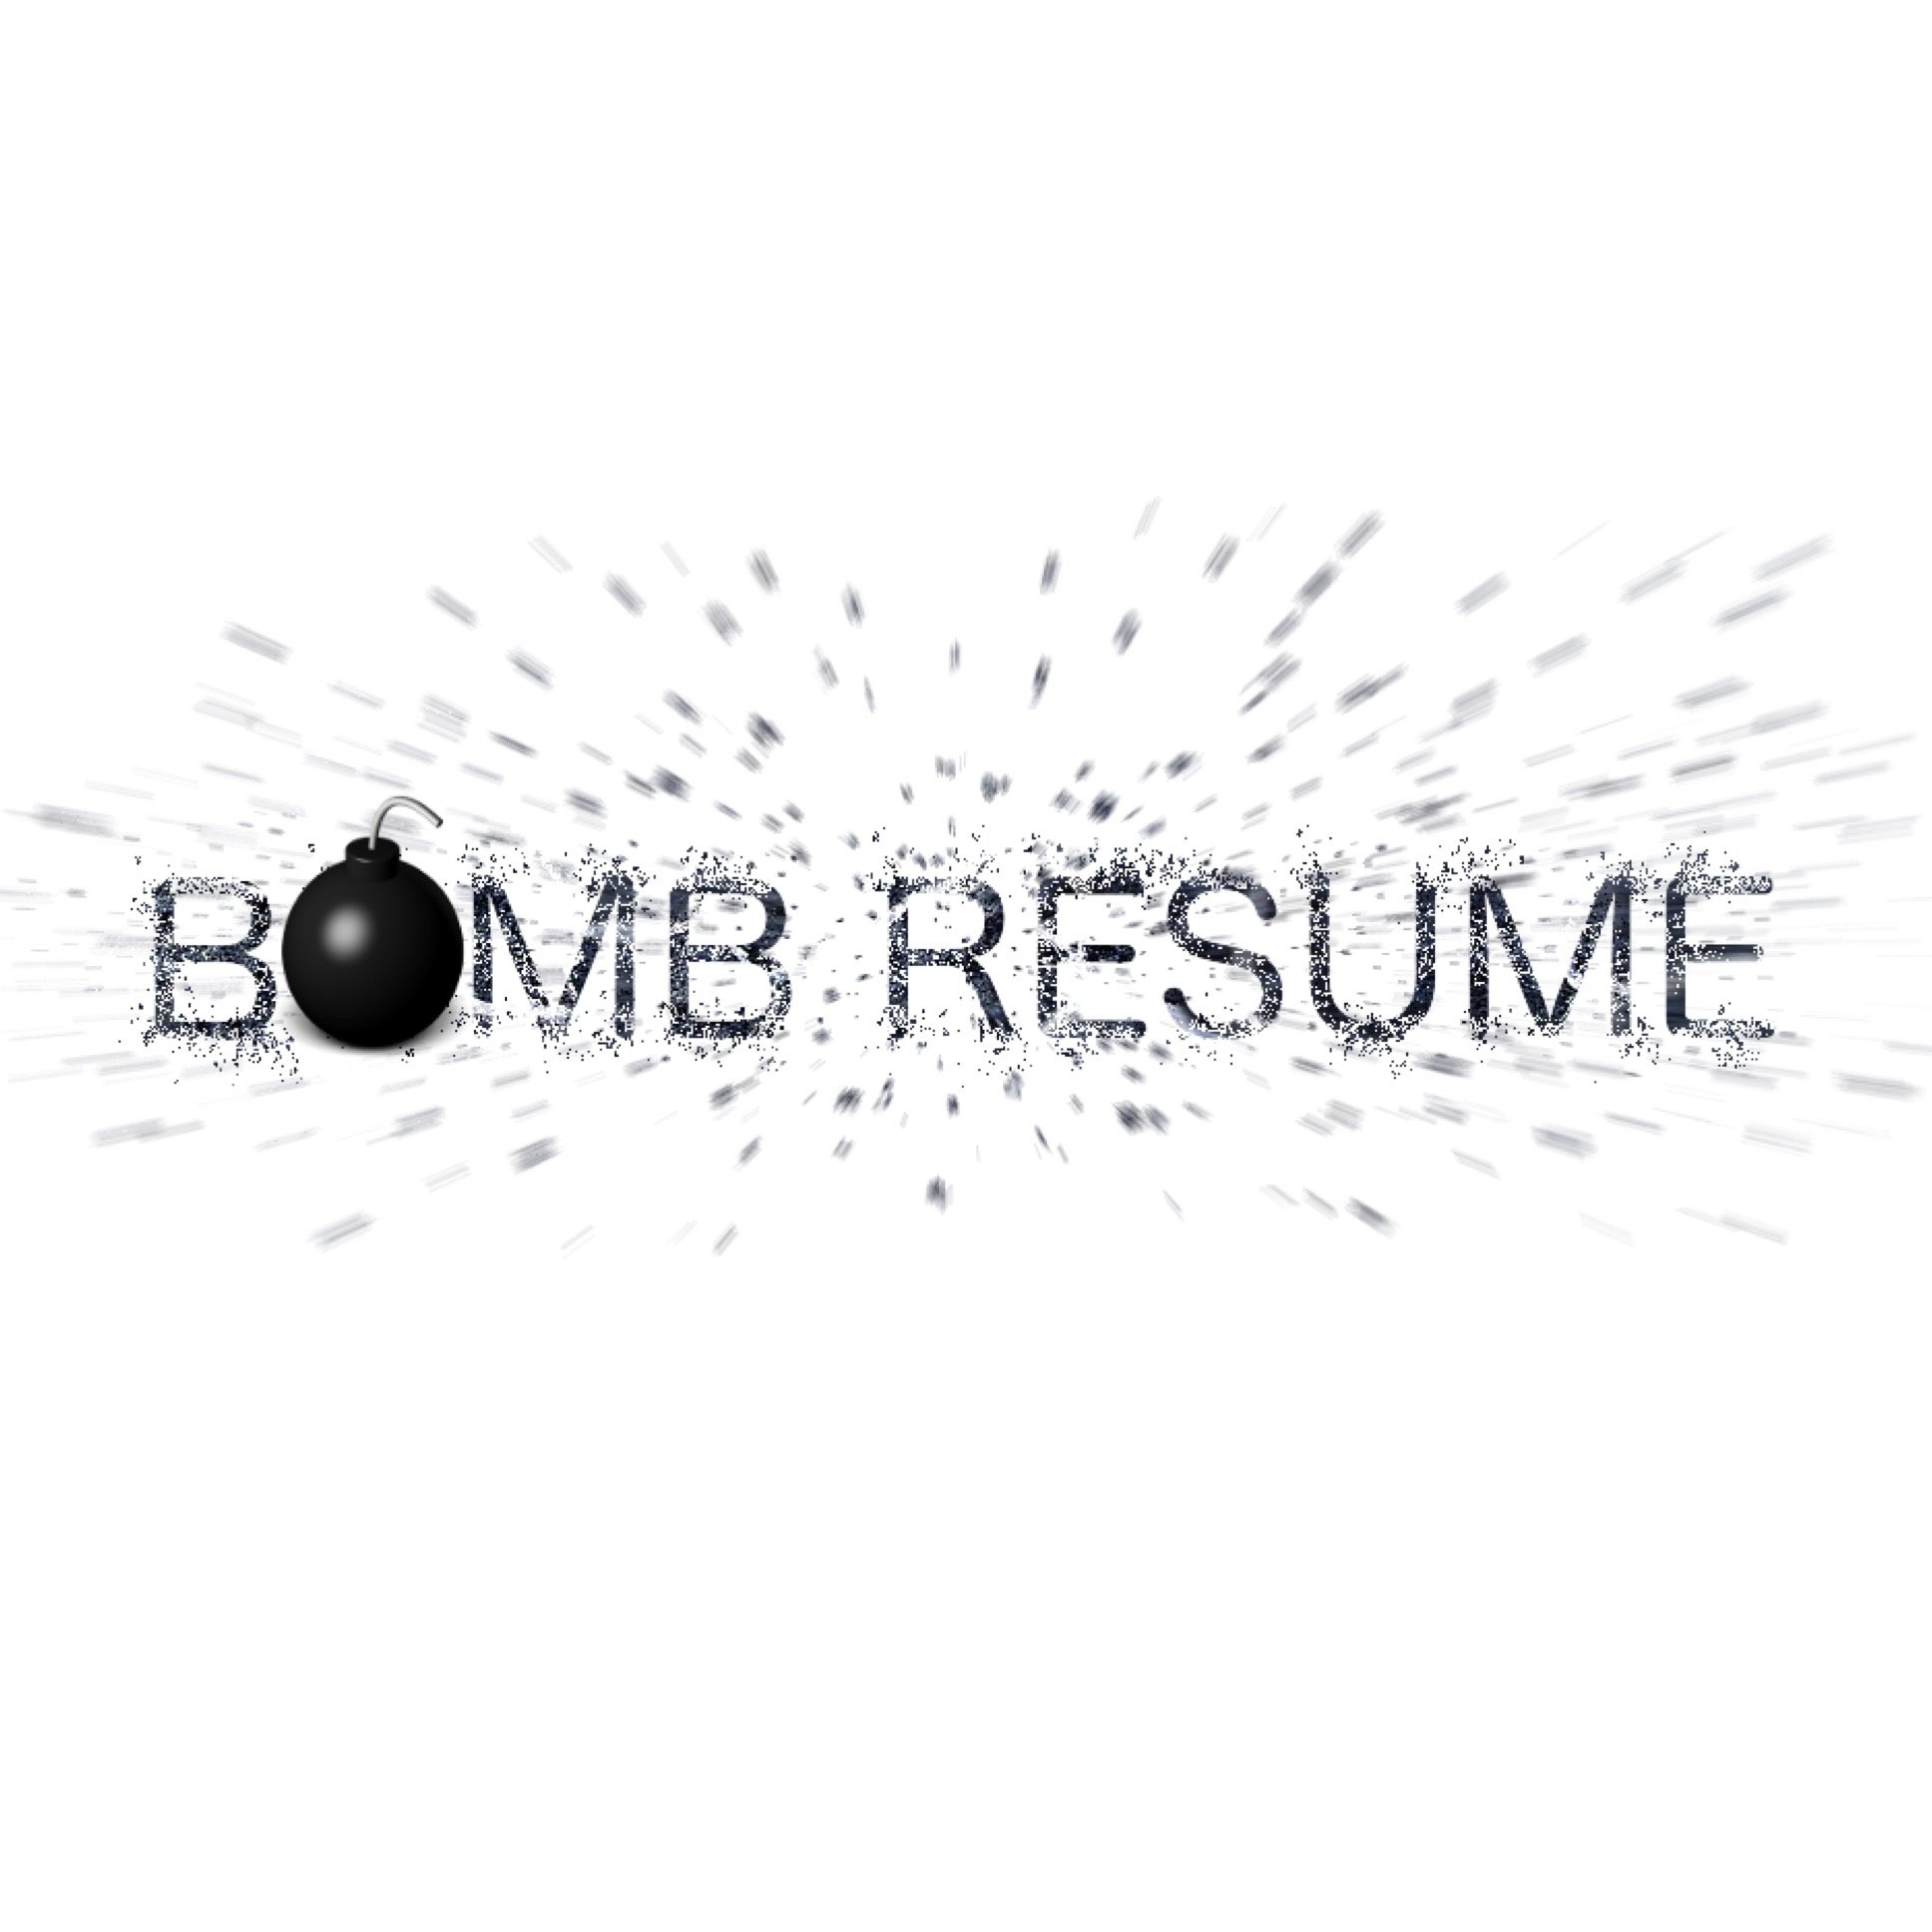 A service providing job seekers with custom resumes using keyword optimization, strong content, and an aesthetically pleasing visual presentation.